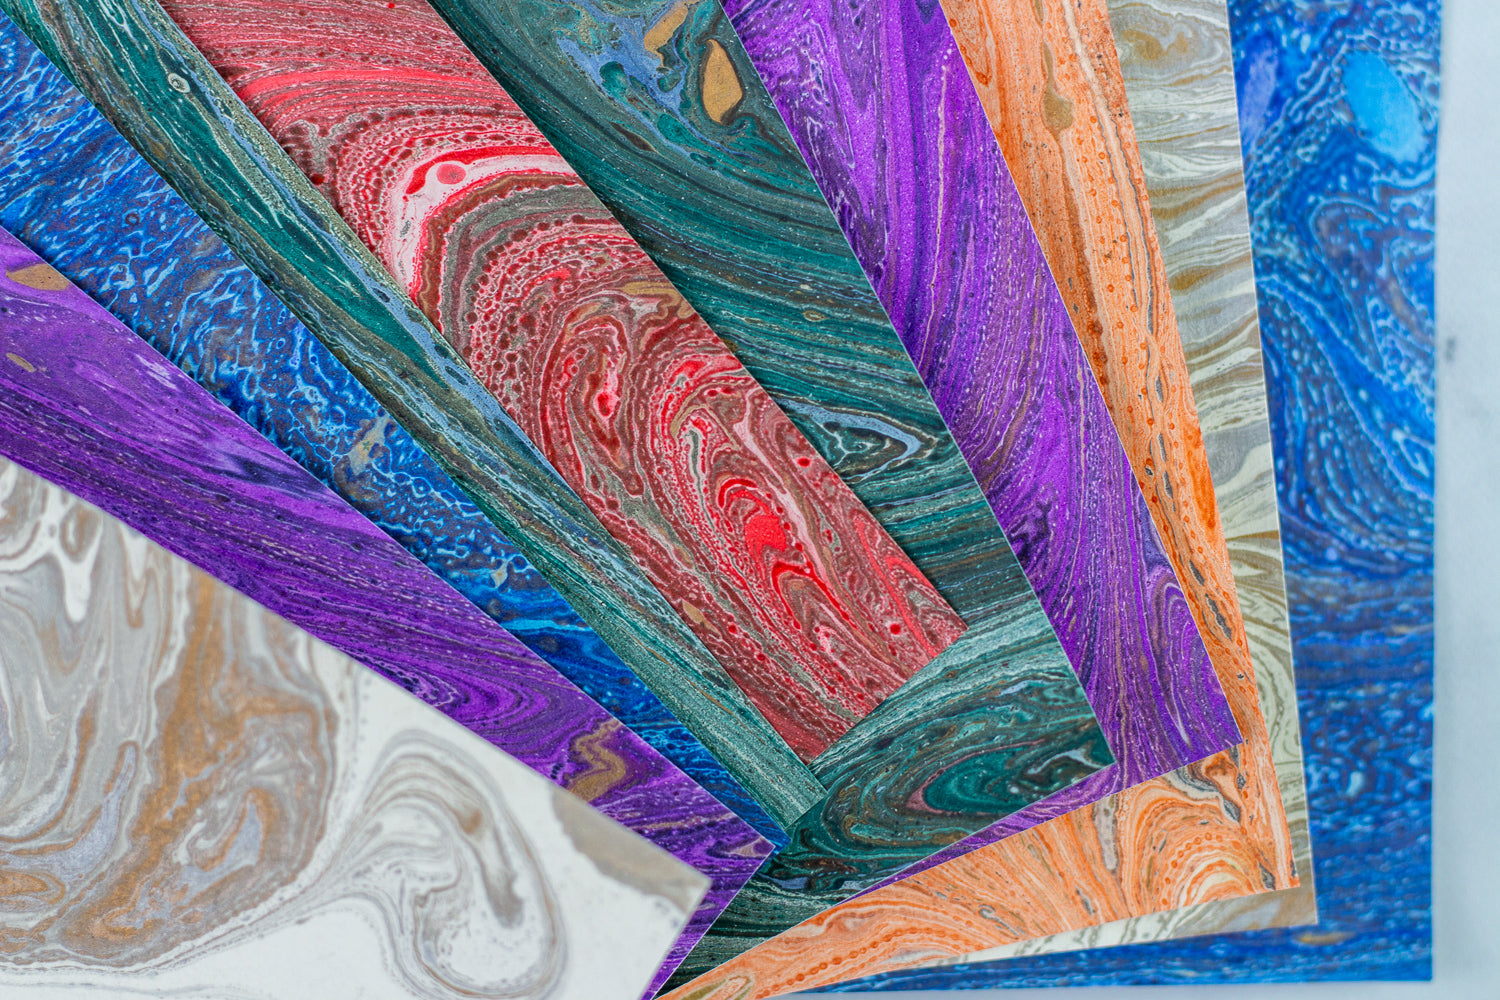 Hand-marbled stationery detail